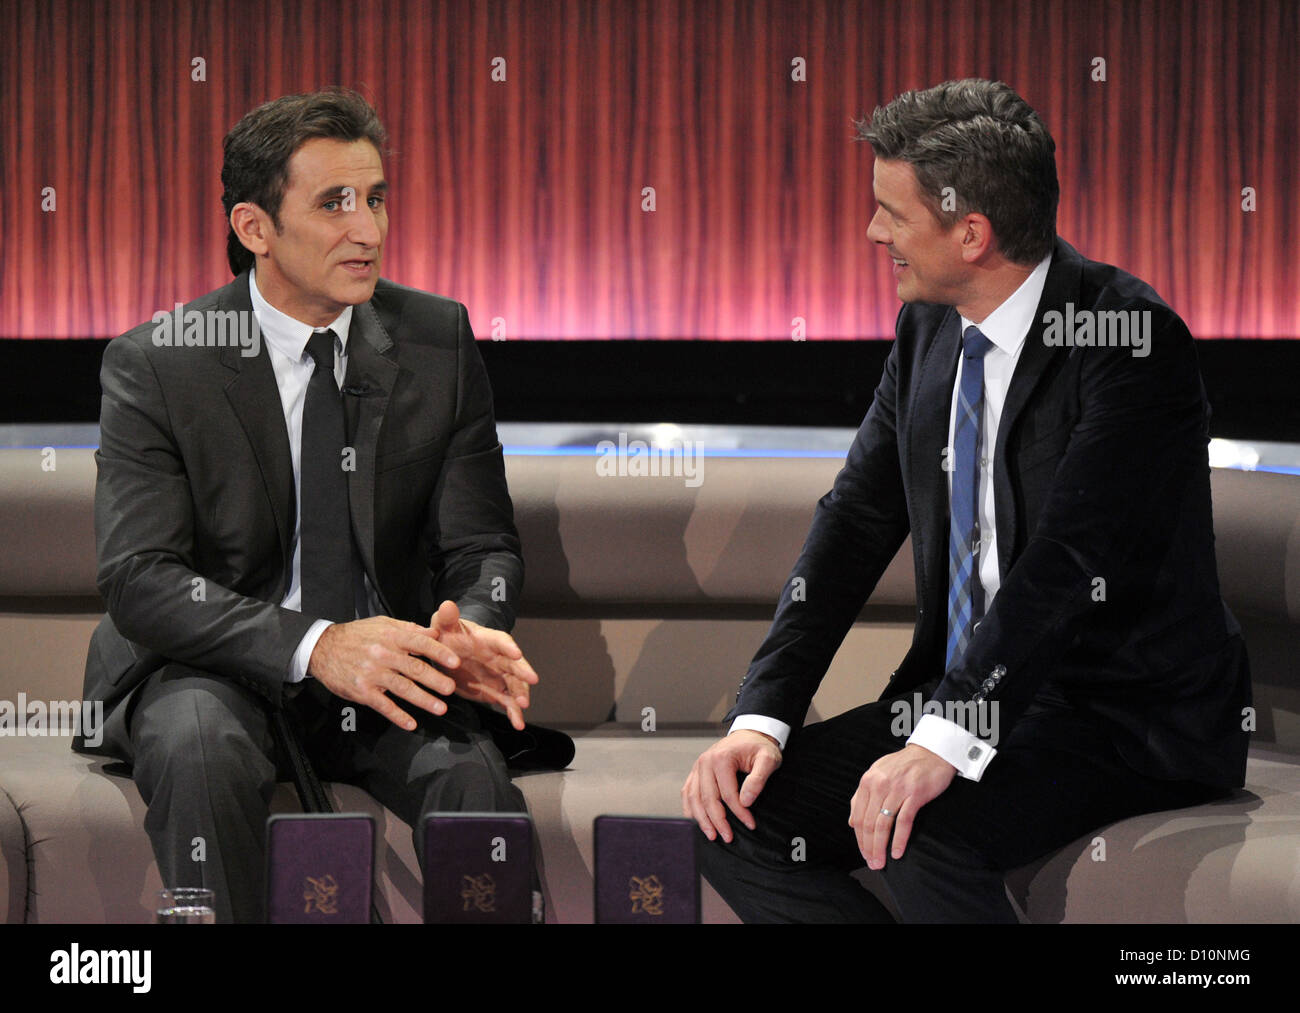 Italian raceing car driver and Olympic winner, Alessandro Zanardi (L), attends the annual review show 'Menschen 2012' (People of 2012) hosted by talk show host Markus Lanz (R) and aired on public television broadcasting station ZDF in Munich, Germany, 2 December 2012, Photo: Marc Mueller Stock Photo